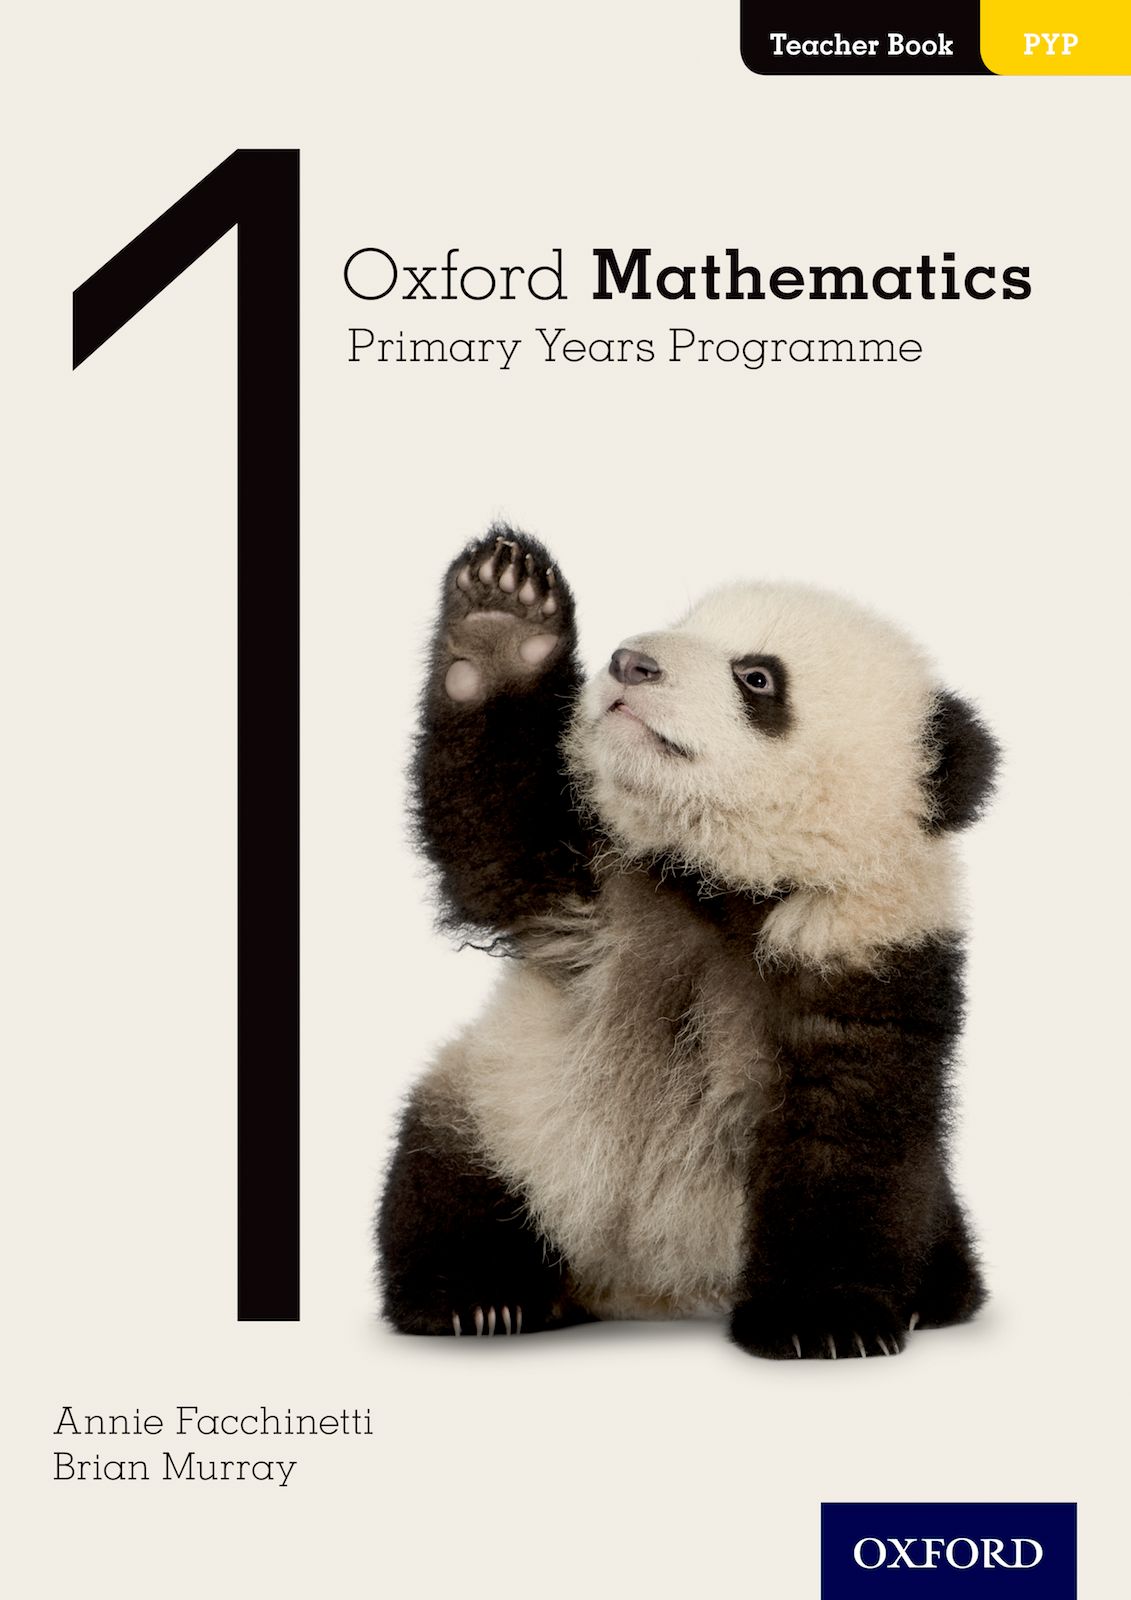 Featured image for “Oxford Mathematics Primary Years Programme Teacher Book 1”